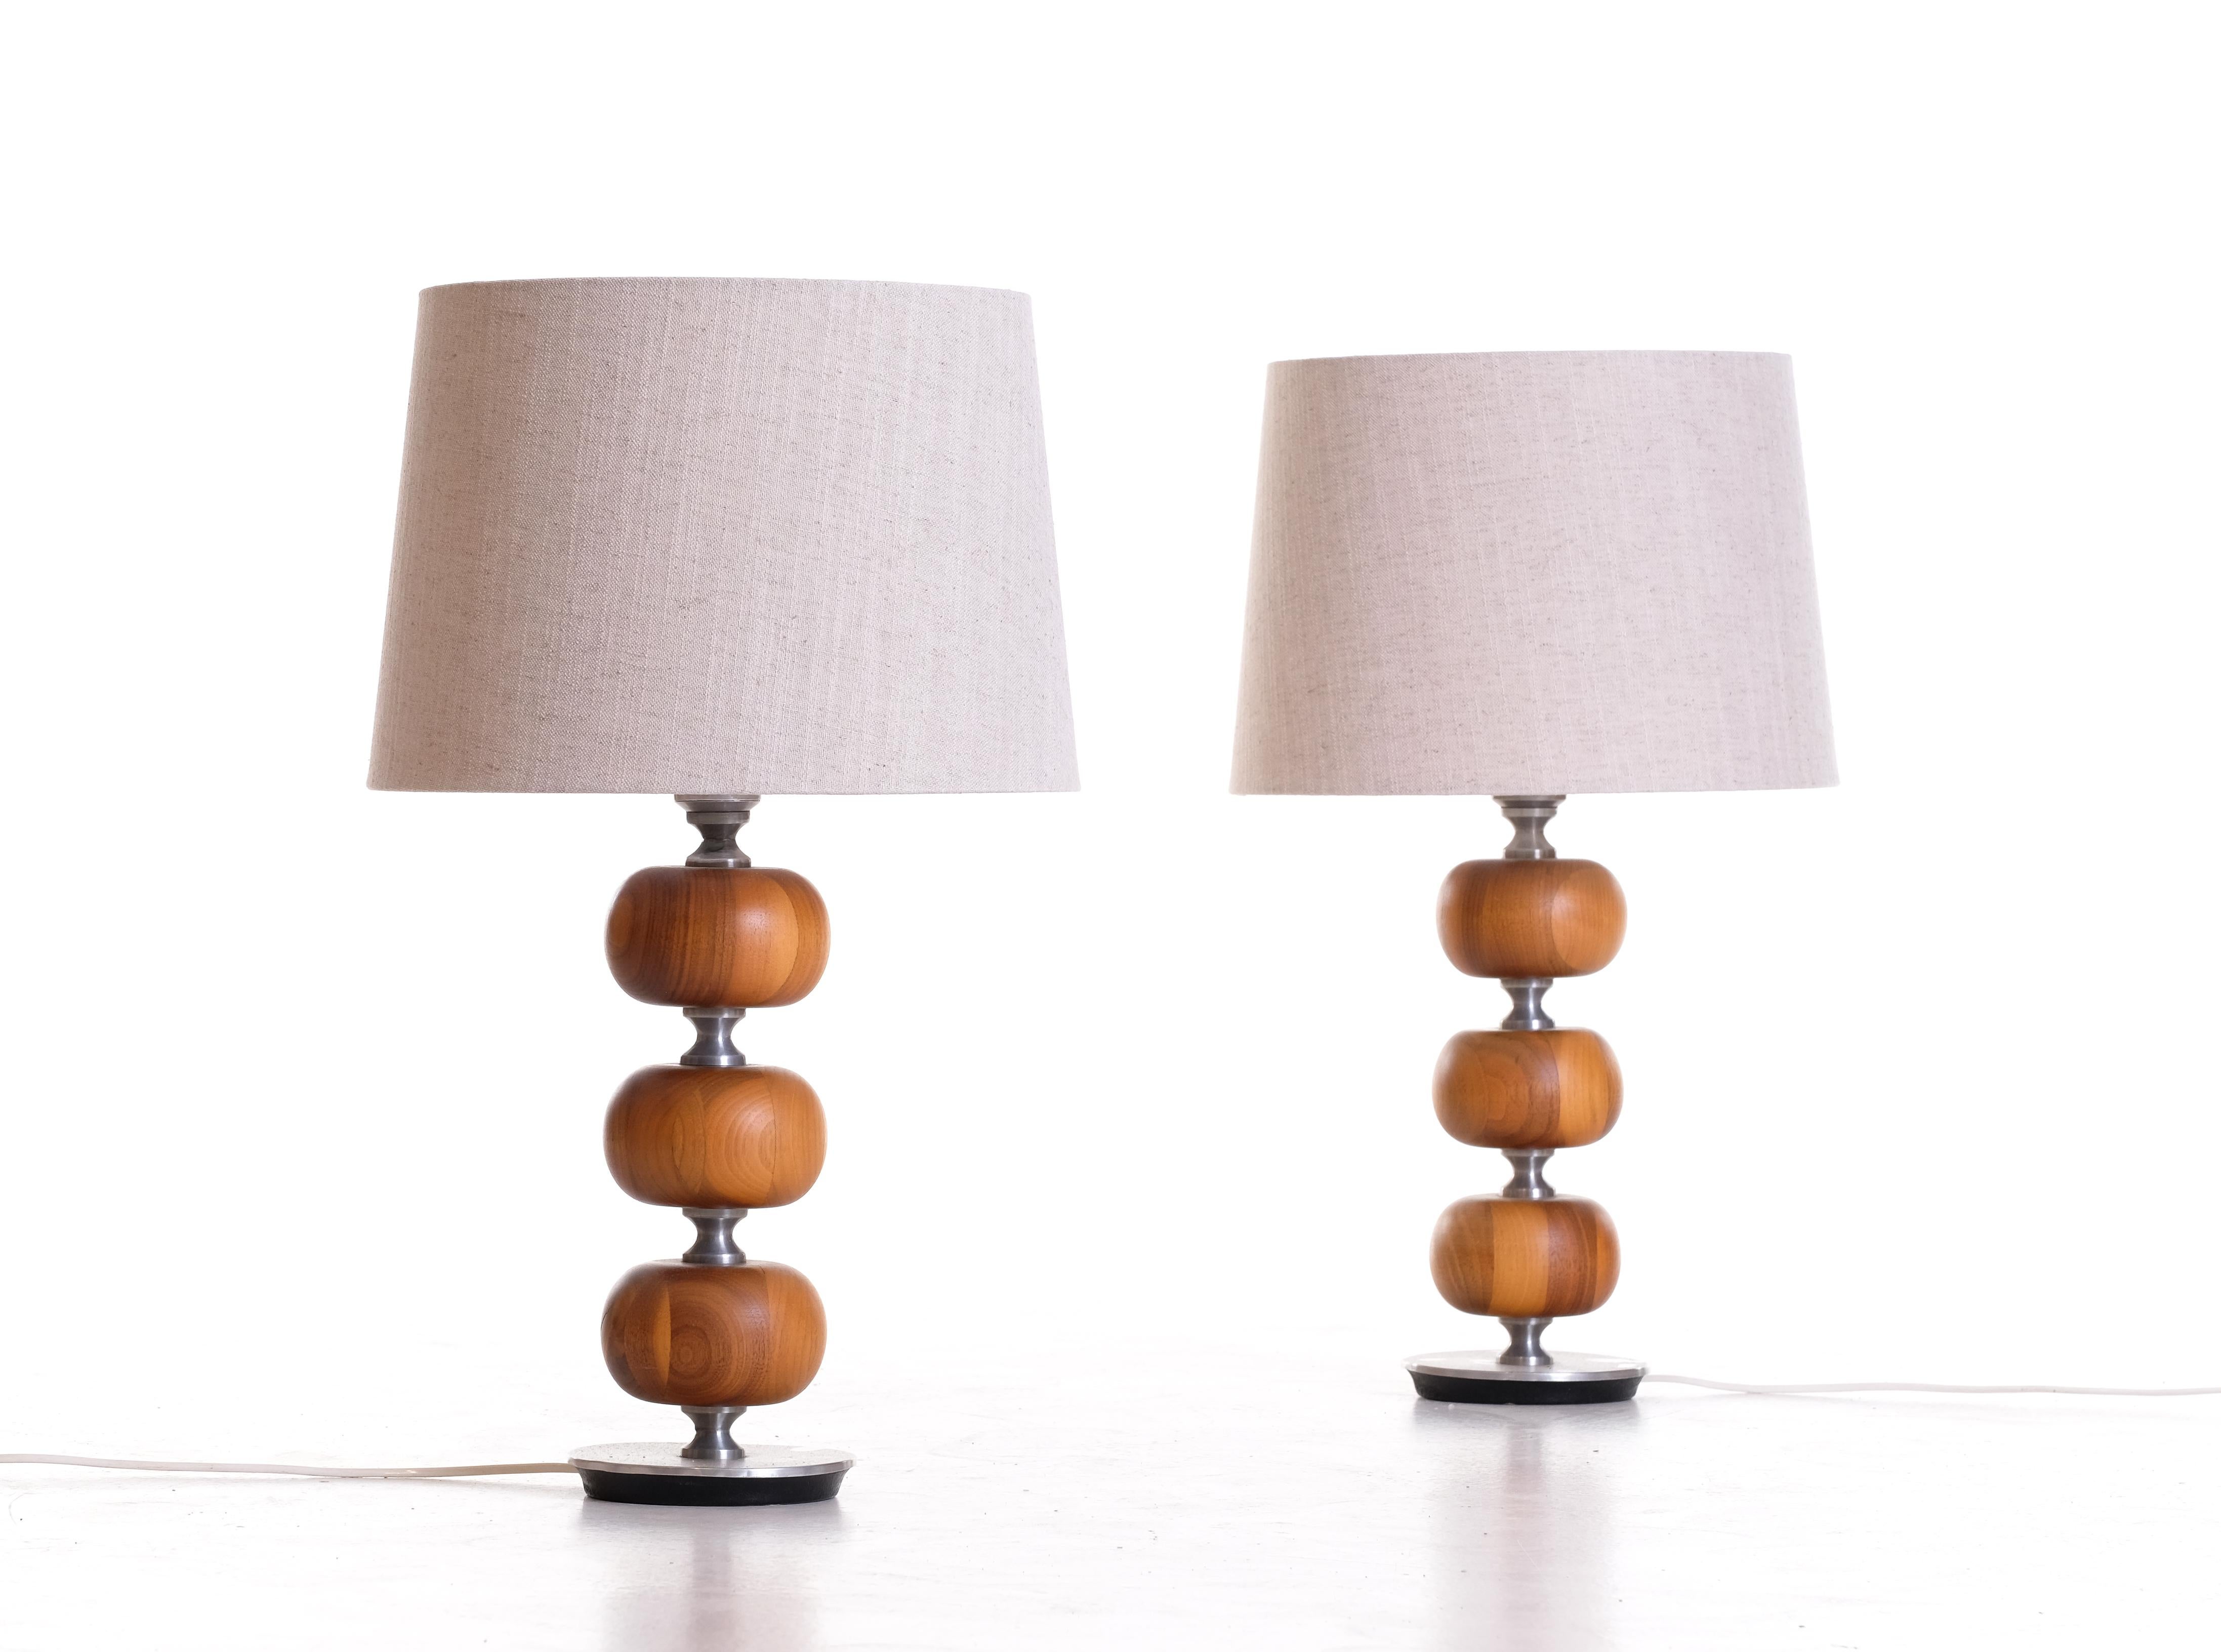 Pair of Swedish Table Lamps by Tranås Stilarmatur, 1960s For Sale 1